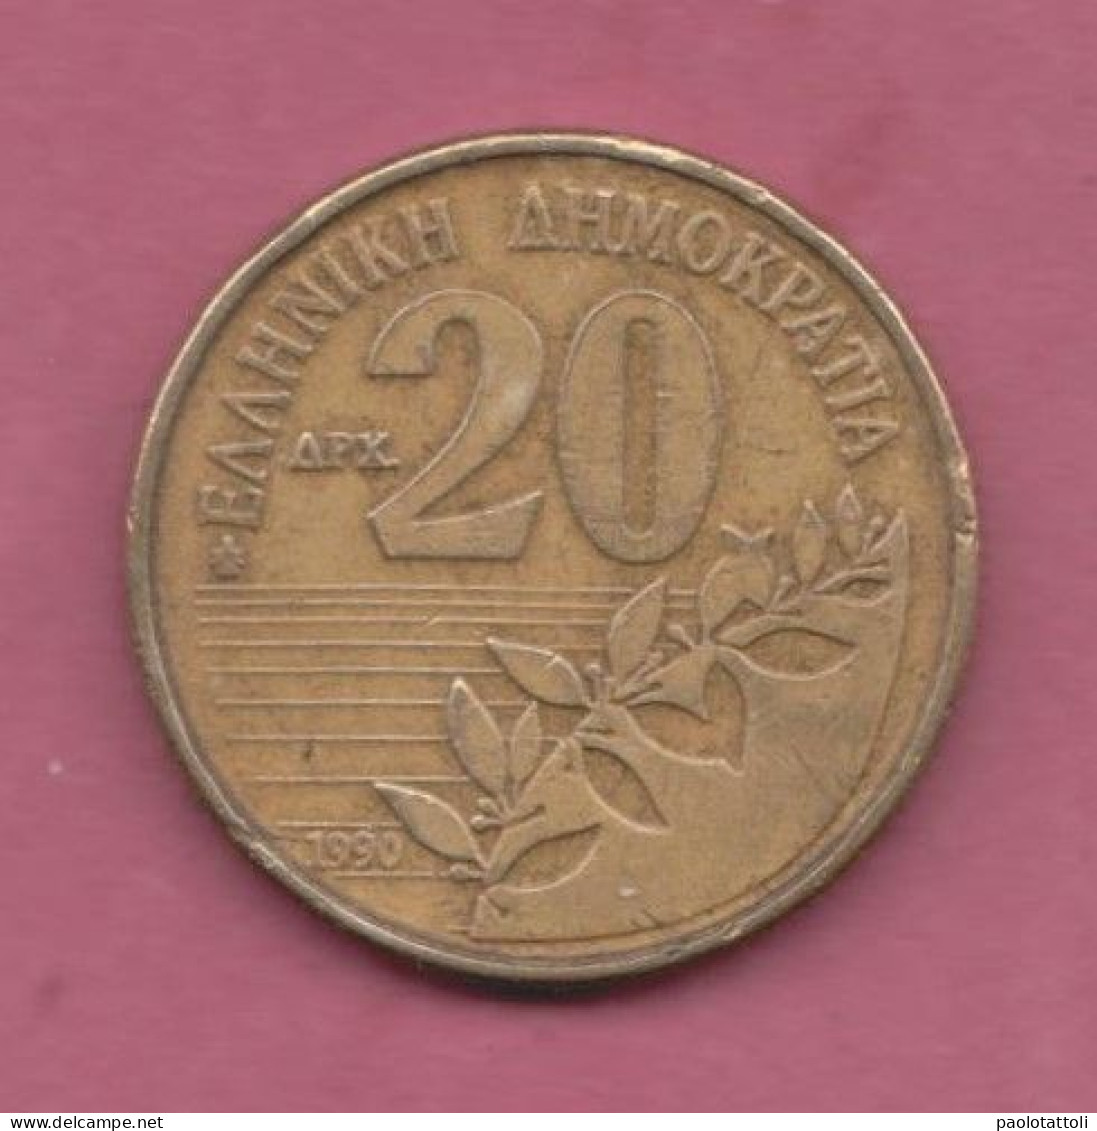 Greece, 1990- 20 Drachmes- Copper-aluminium-nickel- Obverse Value Accompanied By An Olive Branch. Reverse Bust Of Dionys - Greece